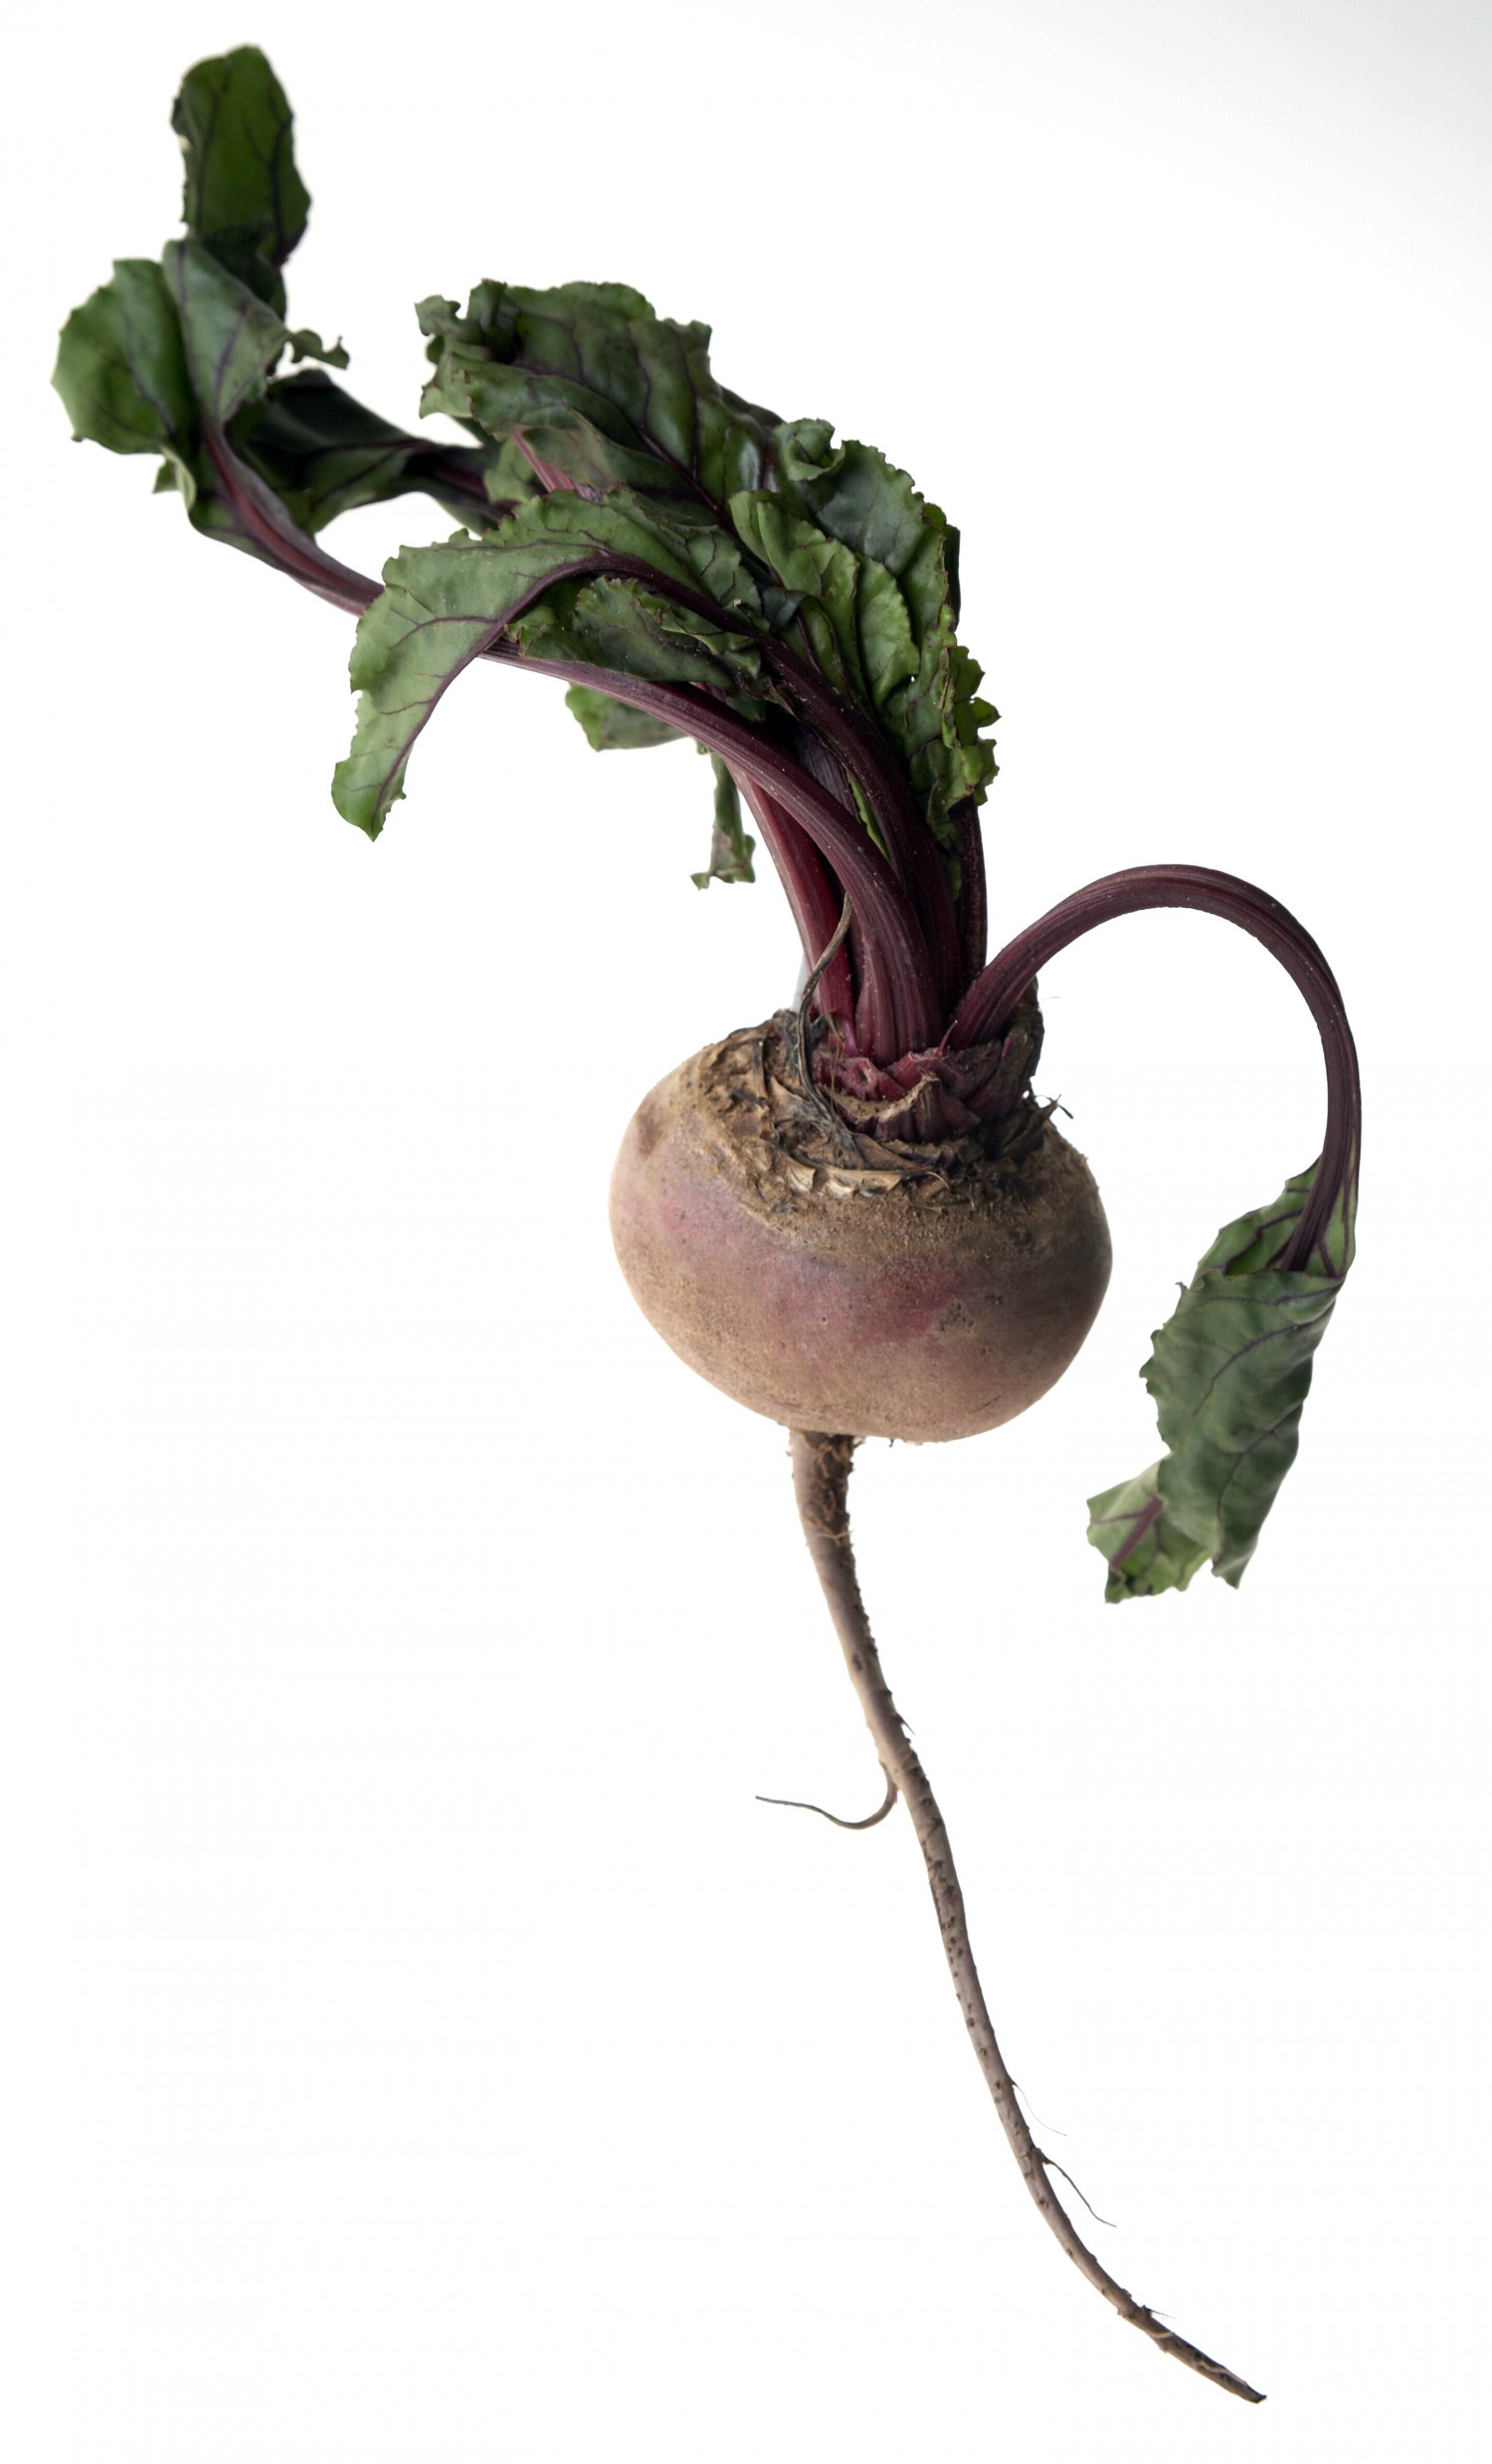 Beetroot with leaves and roots on white background